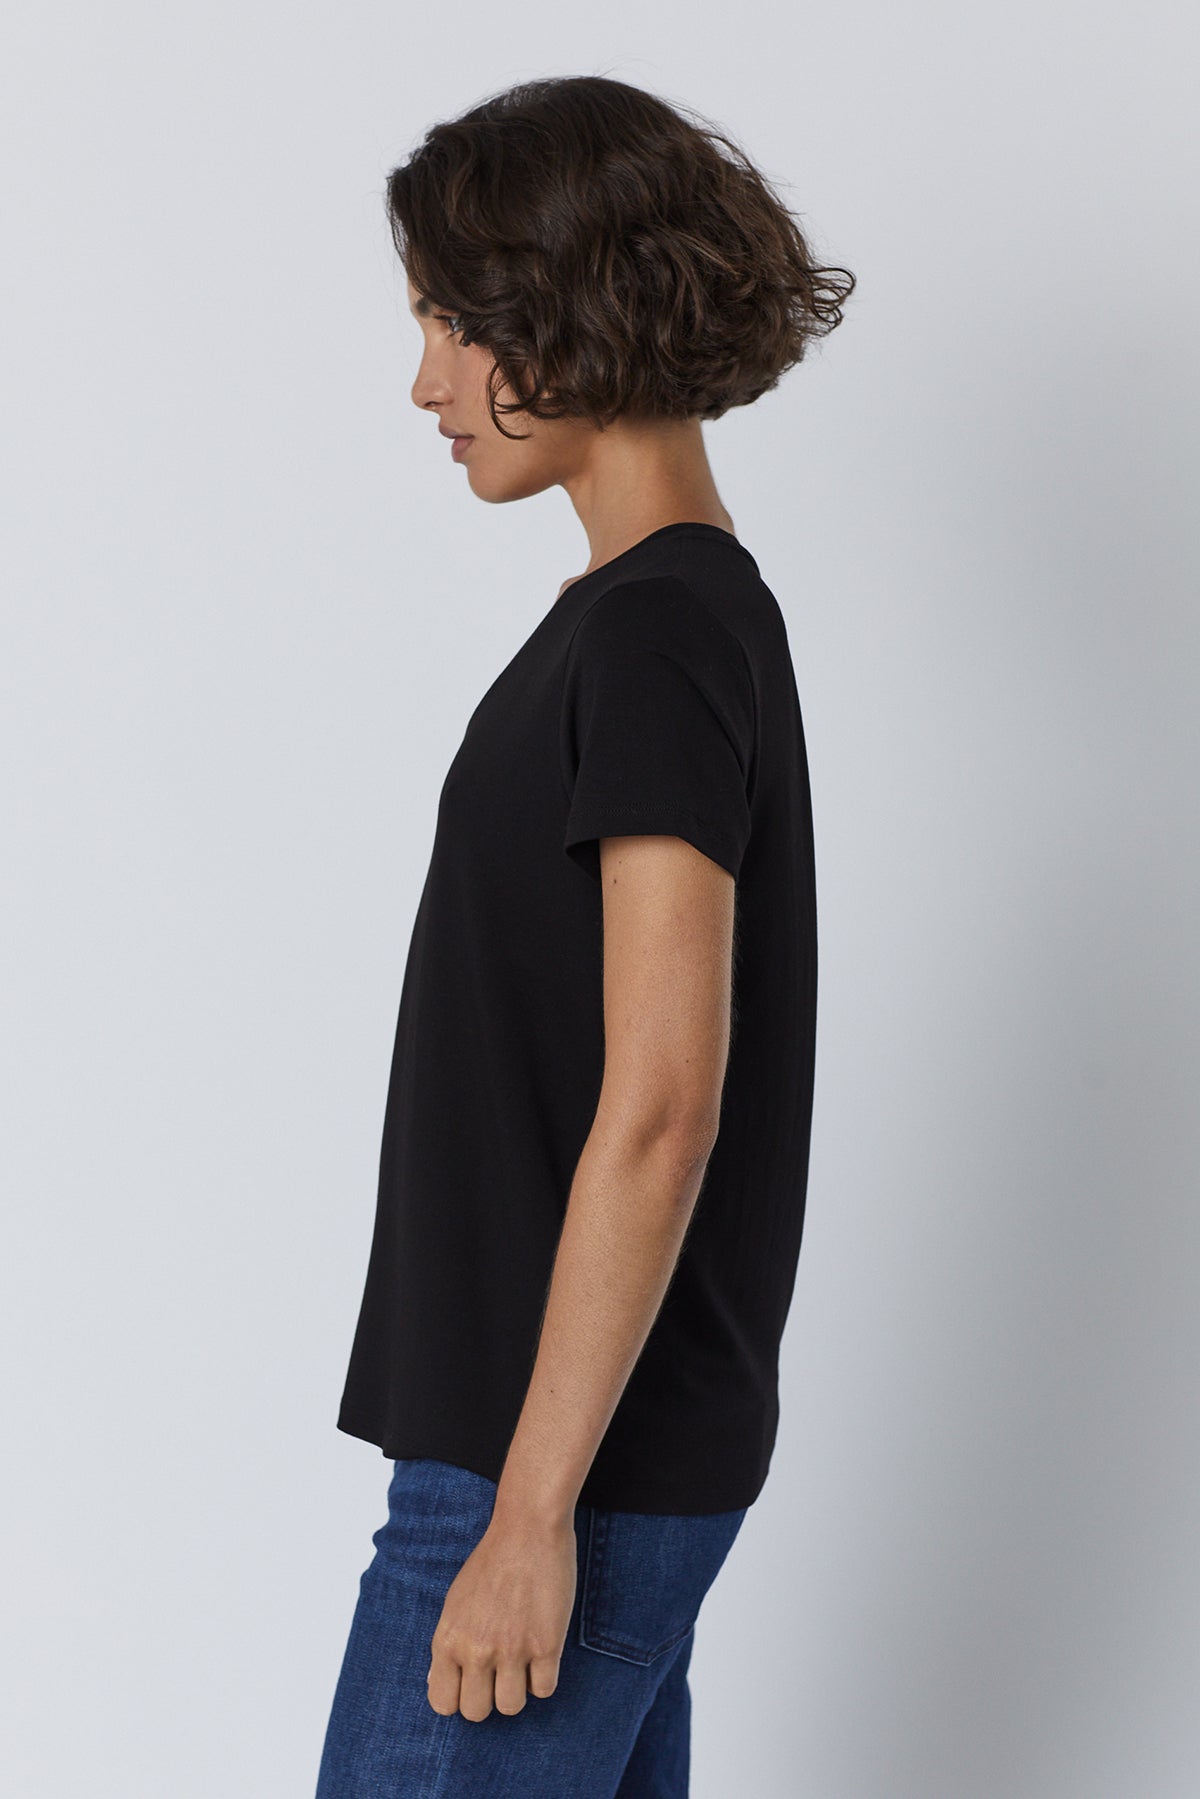 Runyon Tee in black with blue denim side-26007207280833